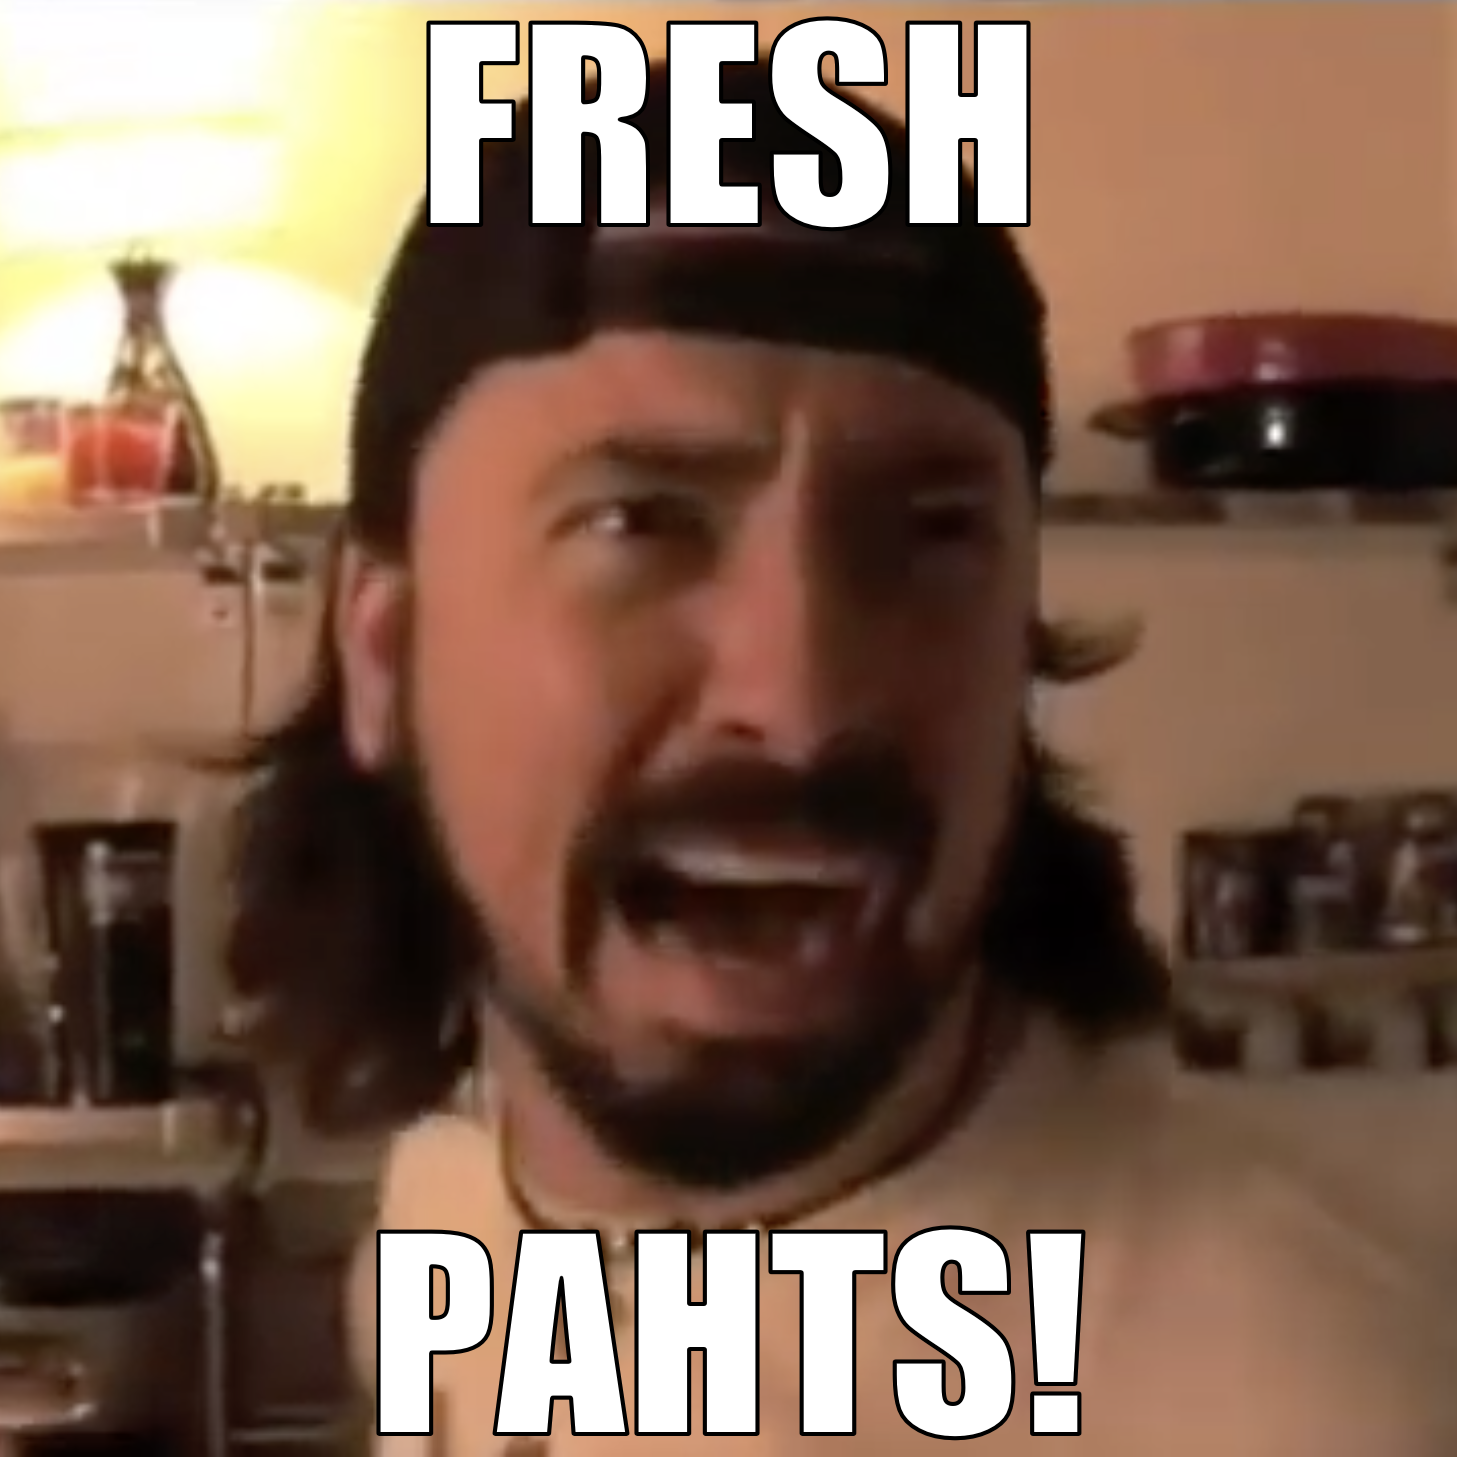 Variation on the ”Dave Grohl - Fresh Pots!“ meme, saying ”Fresh Pahts!“, e.g. ”fresh parts“ instead.